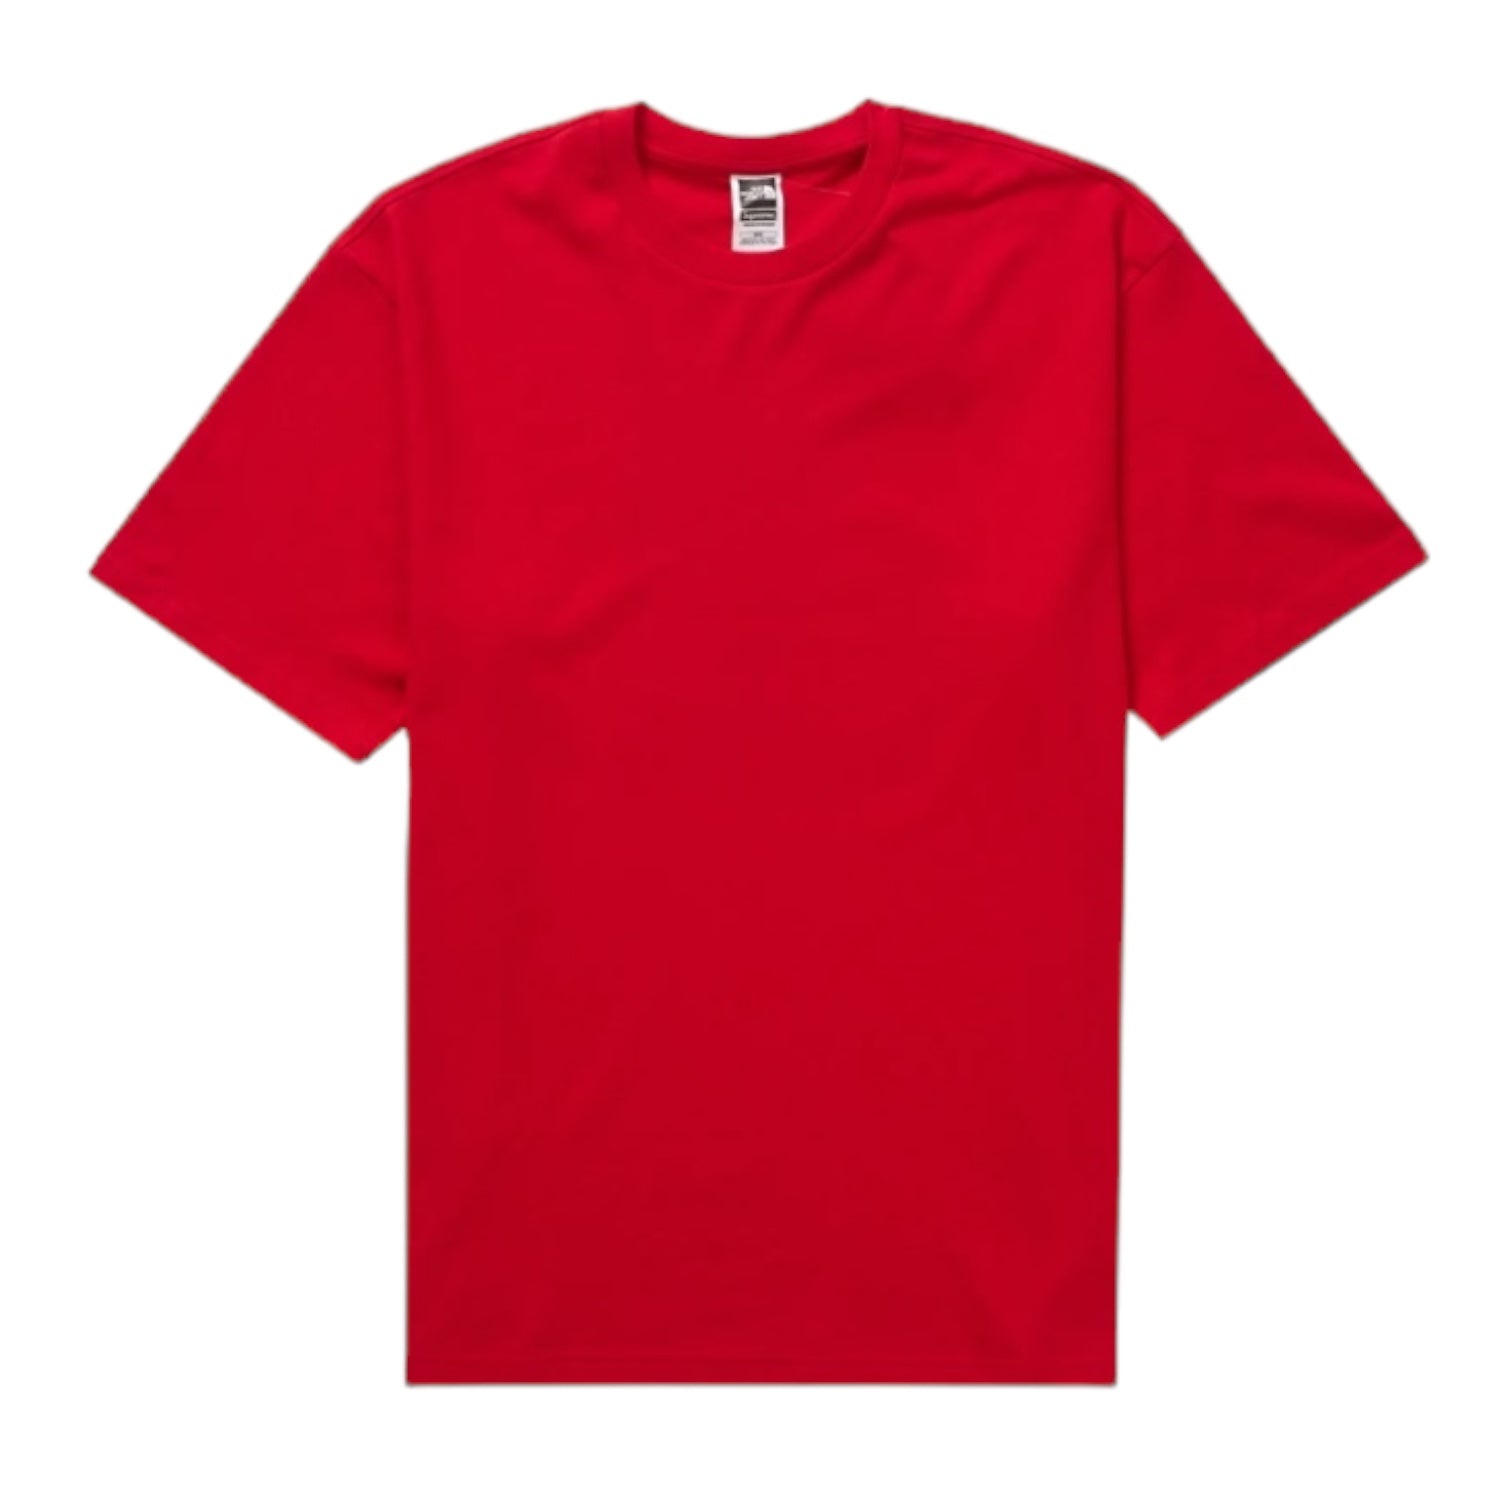 Supreme x The North Face S/S Top Red